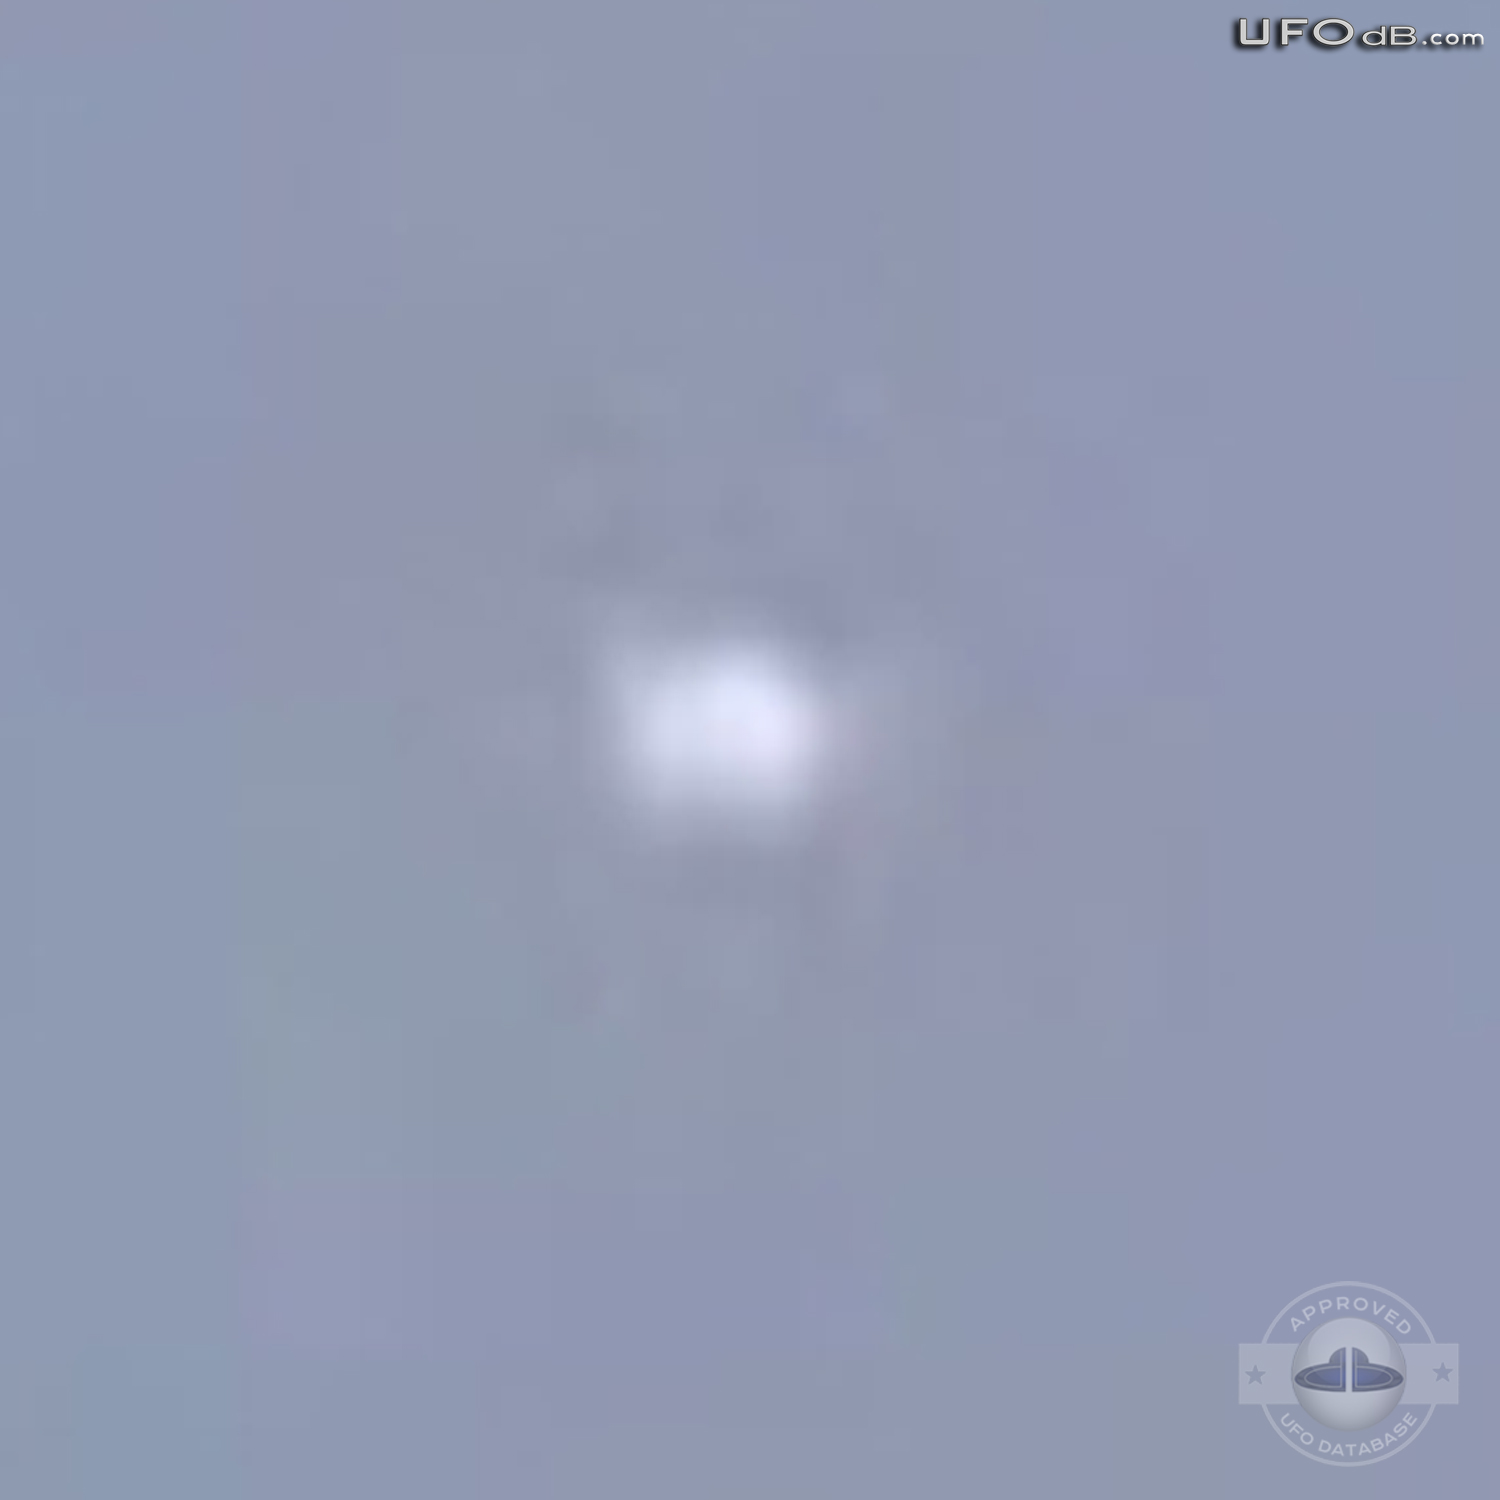 White craft UFO passing in the clouds of Mexico City | May 13 2011 UFO Picture #305-5